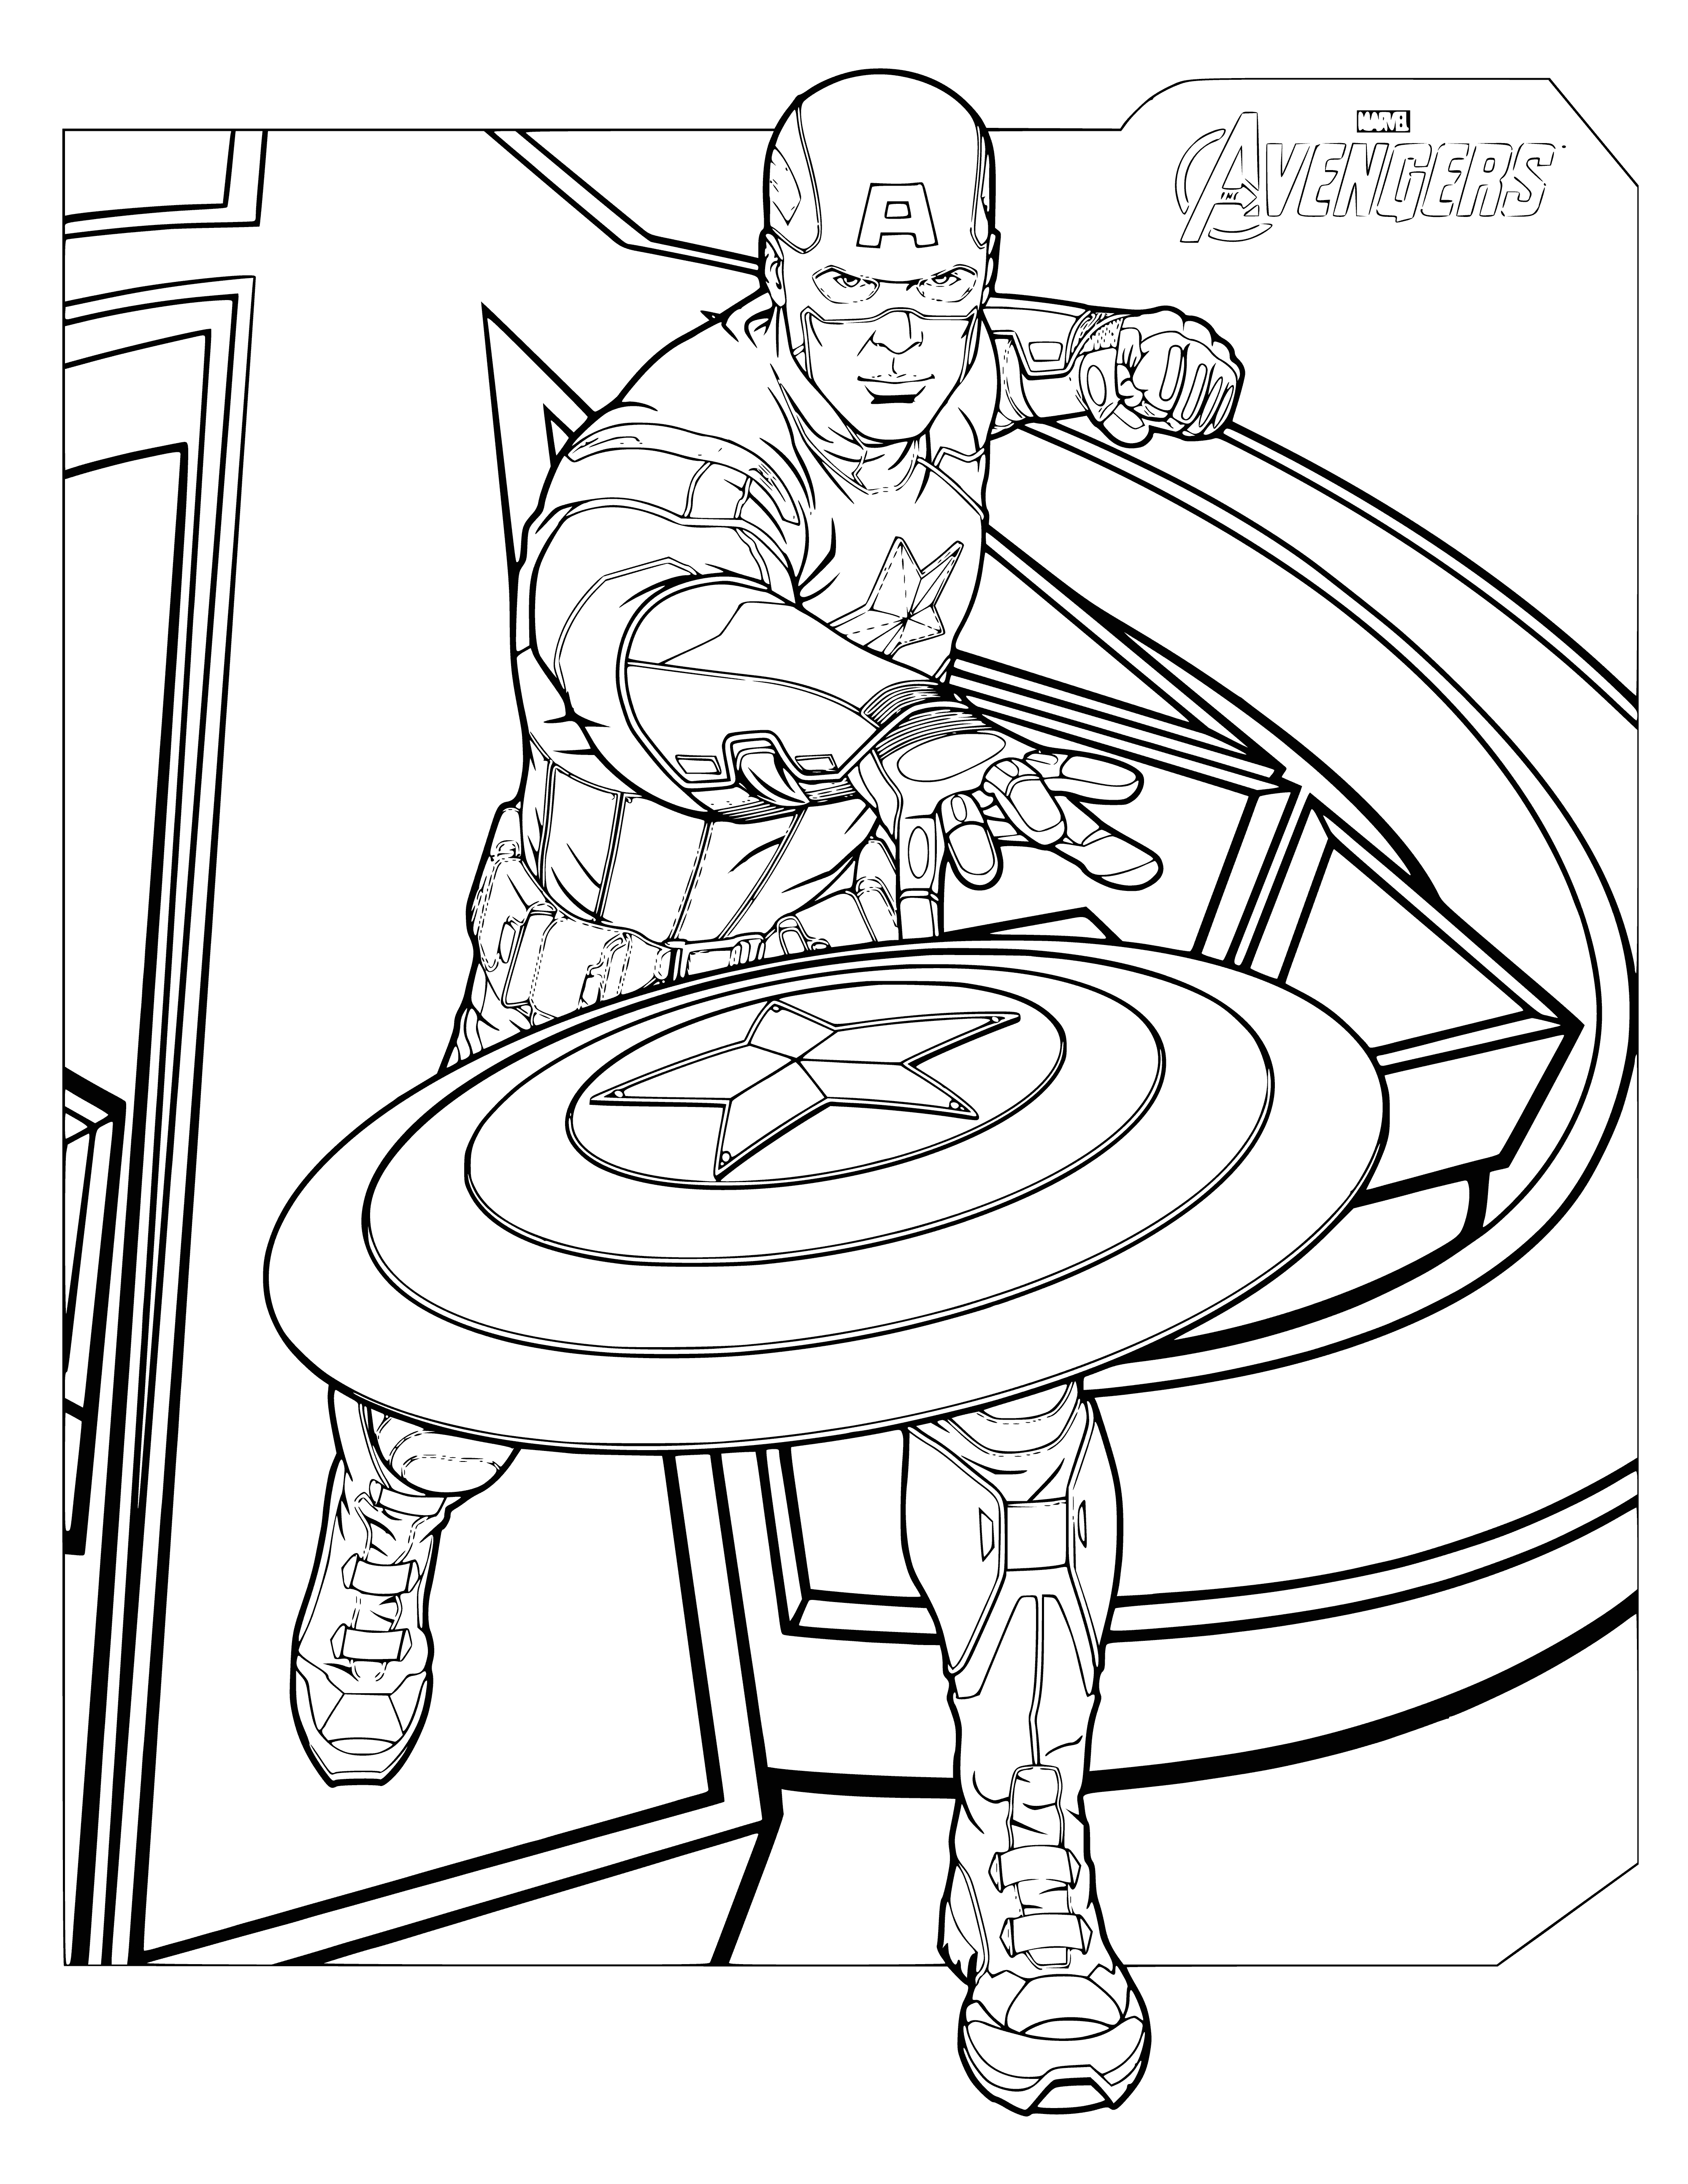 coloring page: Superhero in blue & white suit w/star on chest, shield in left hand, looking right w/determined expression. Group in costumes ready to fight behind him.